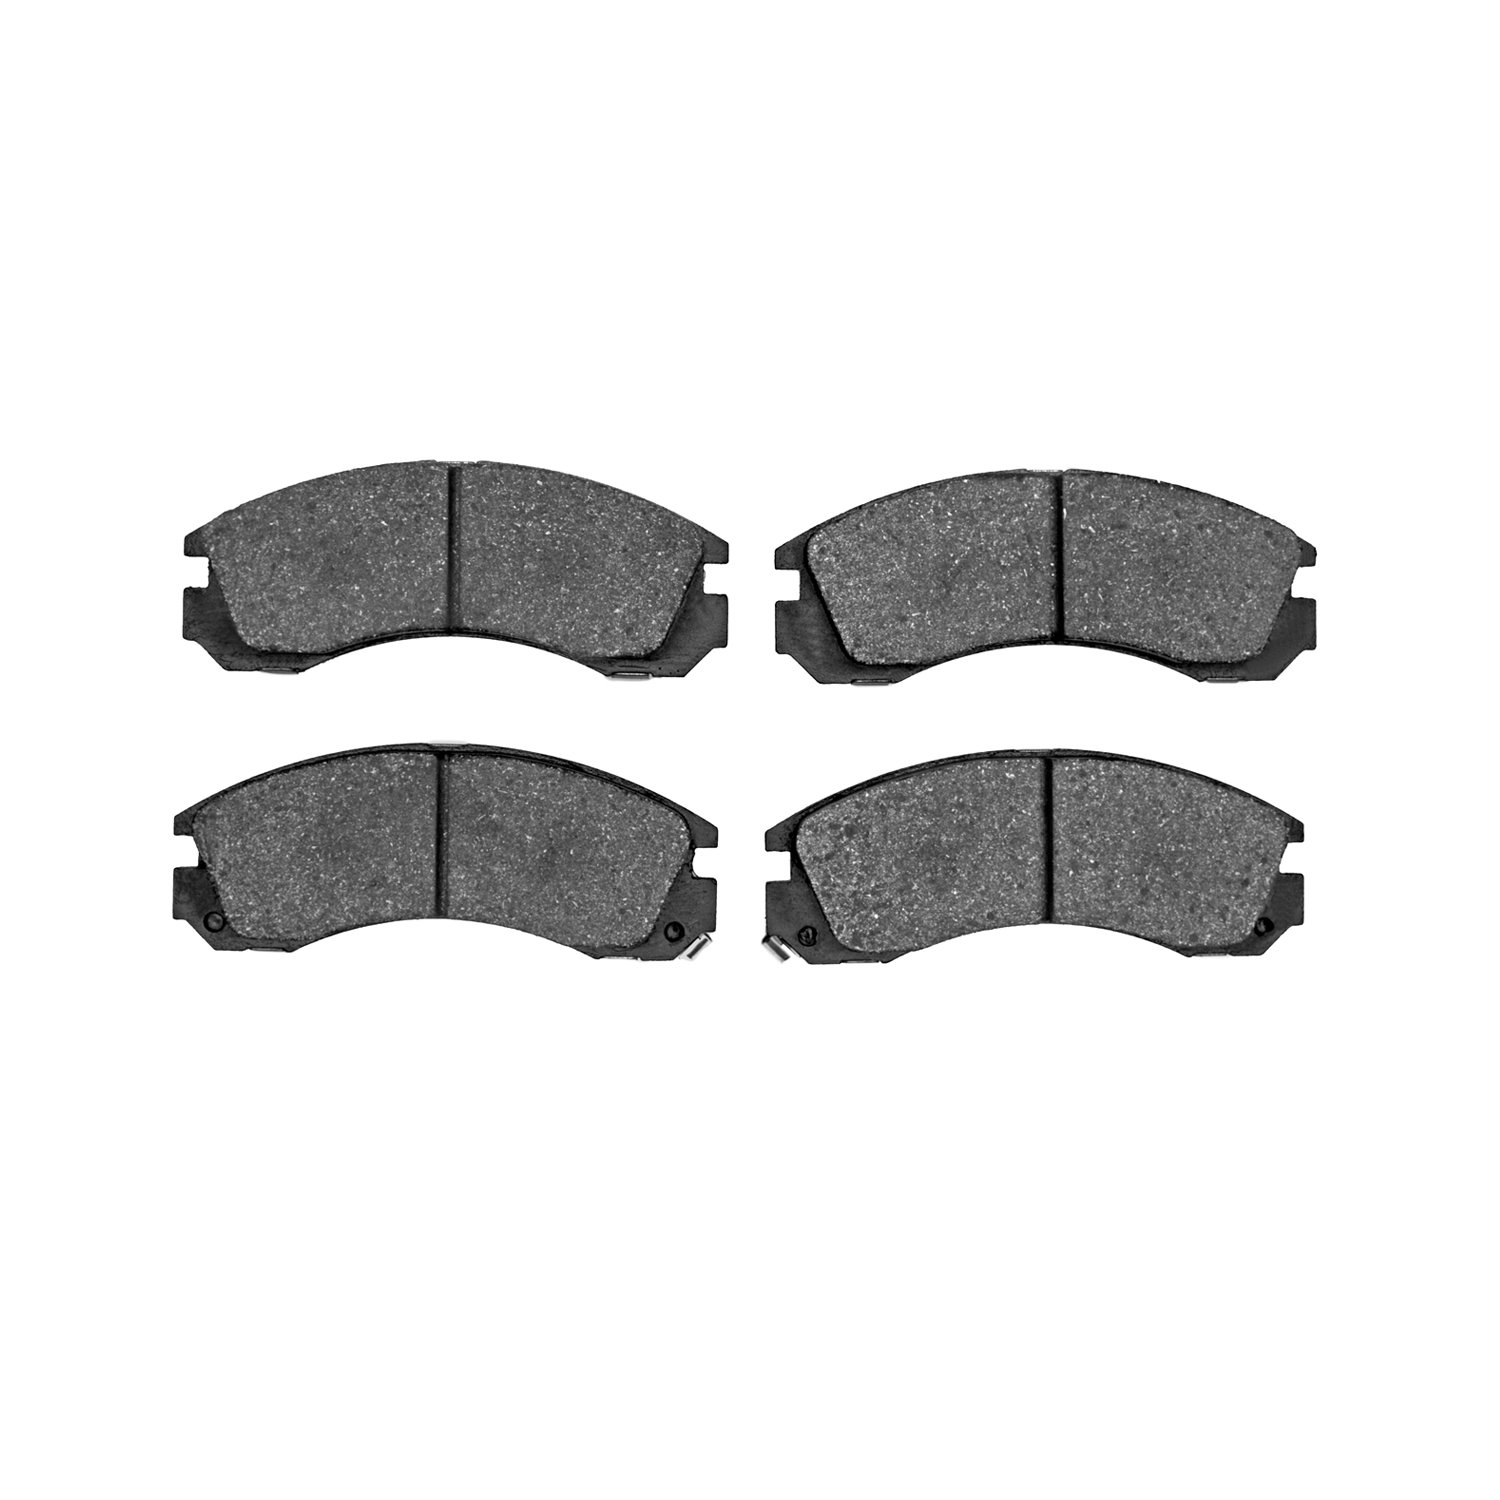 1115-0530-00 Active Performance Low-Metallic Brake Pads, Fits Select Multiple Makes/Models, Position: Front